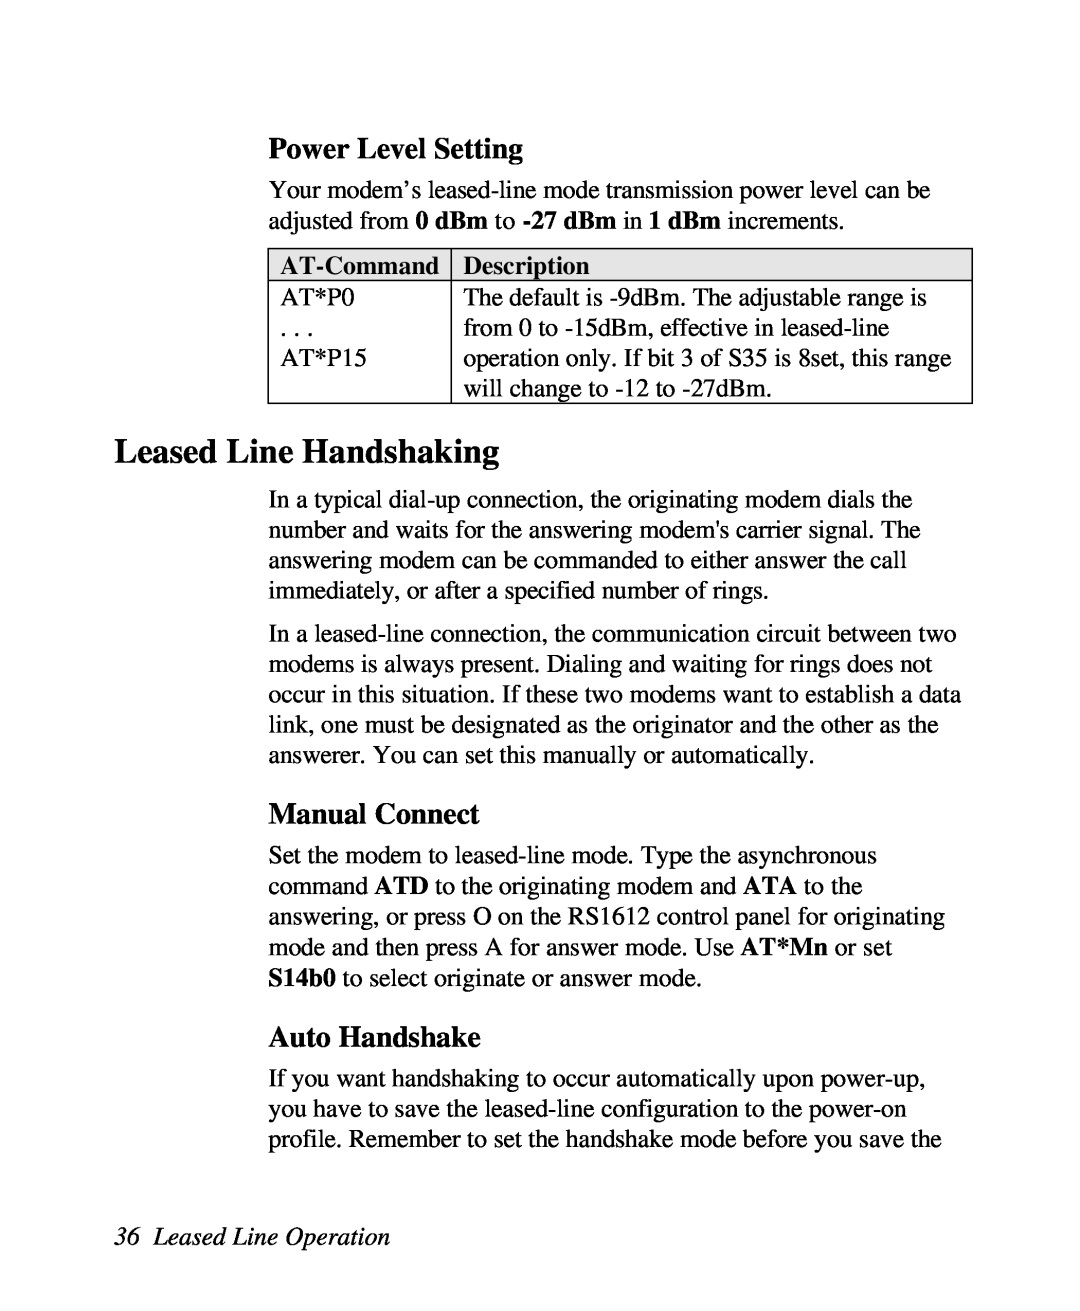 ZyXEL Communications U-336R/RE manual Leased Line Handshaking, Power Level Setting, Manual Connect, Auto Handshake 